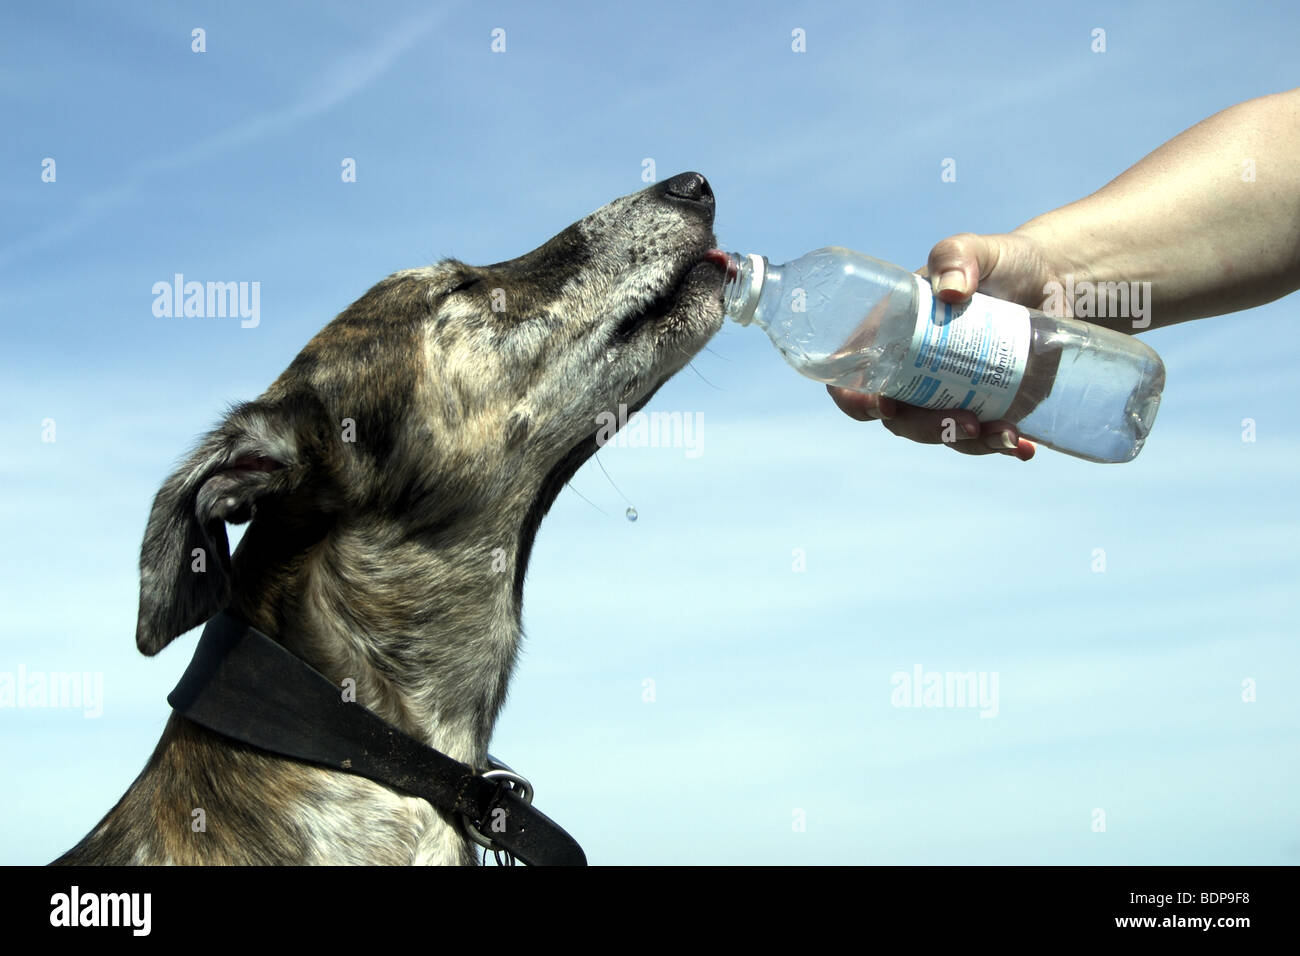 Thirsty dog drinking from water bottle on hot summers day. Stock Photo